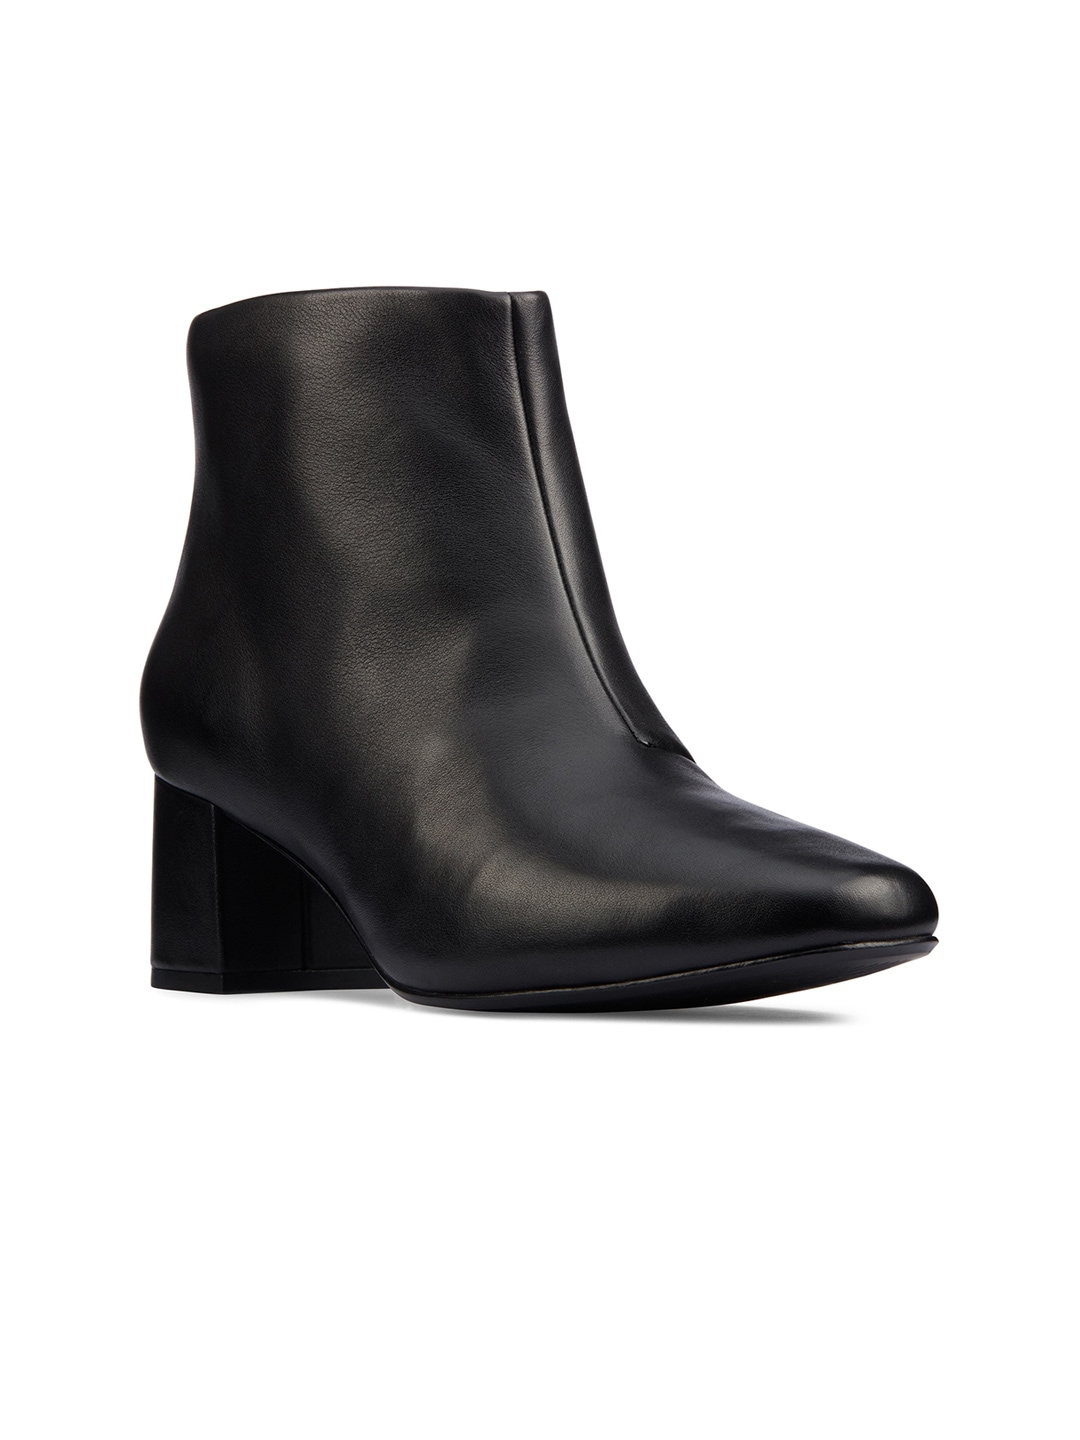 Clarks Black Leather Block Heeled Boots Price in India